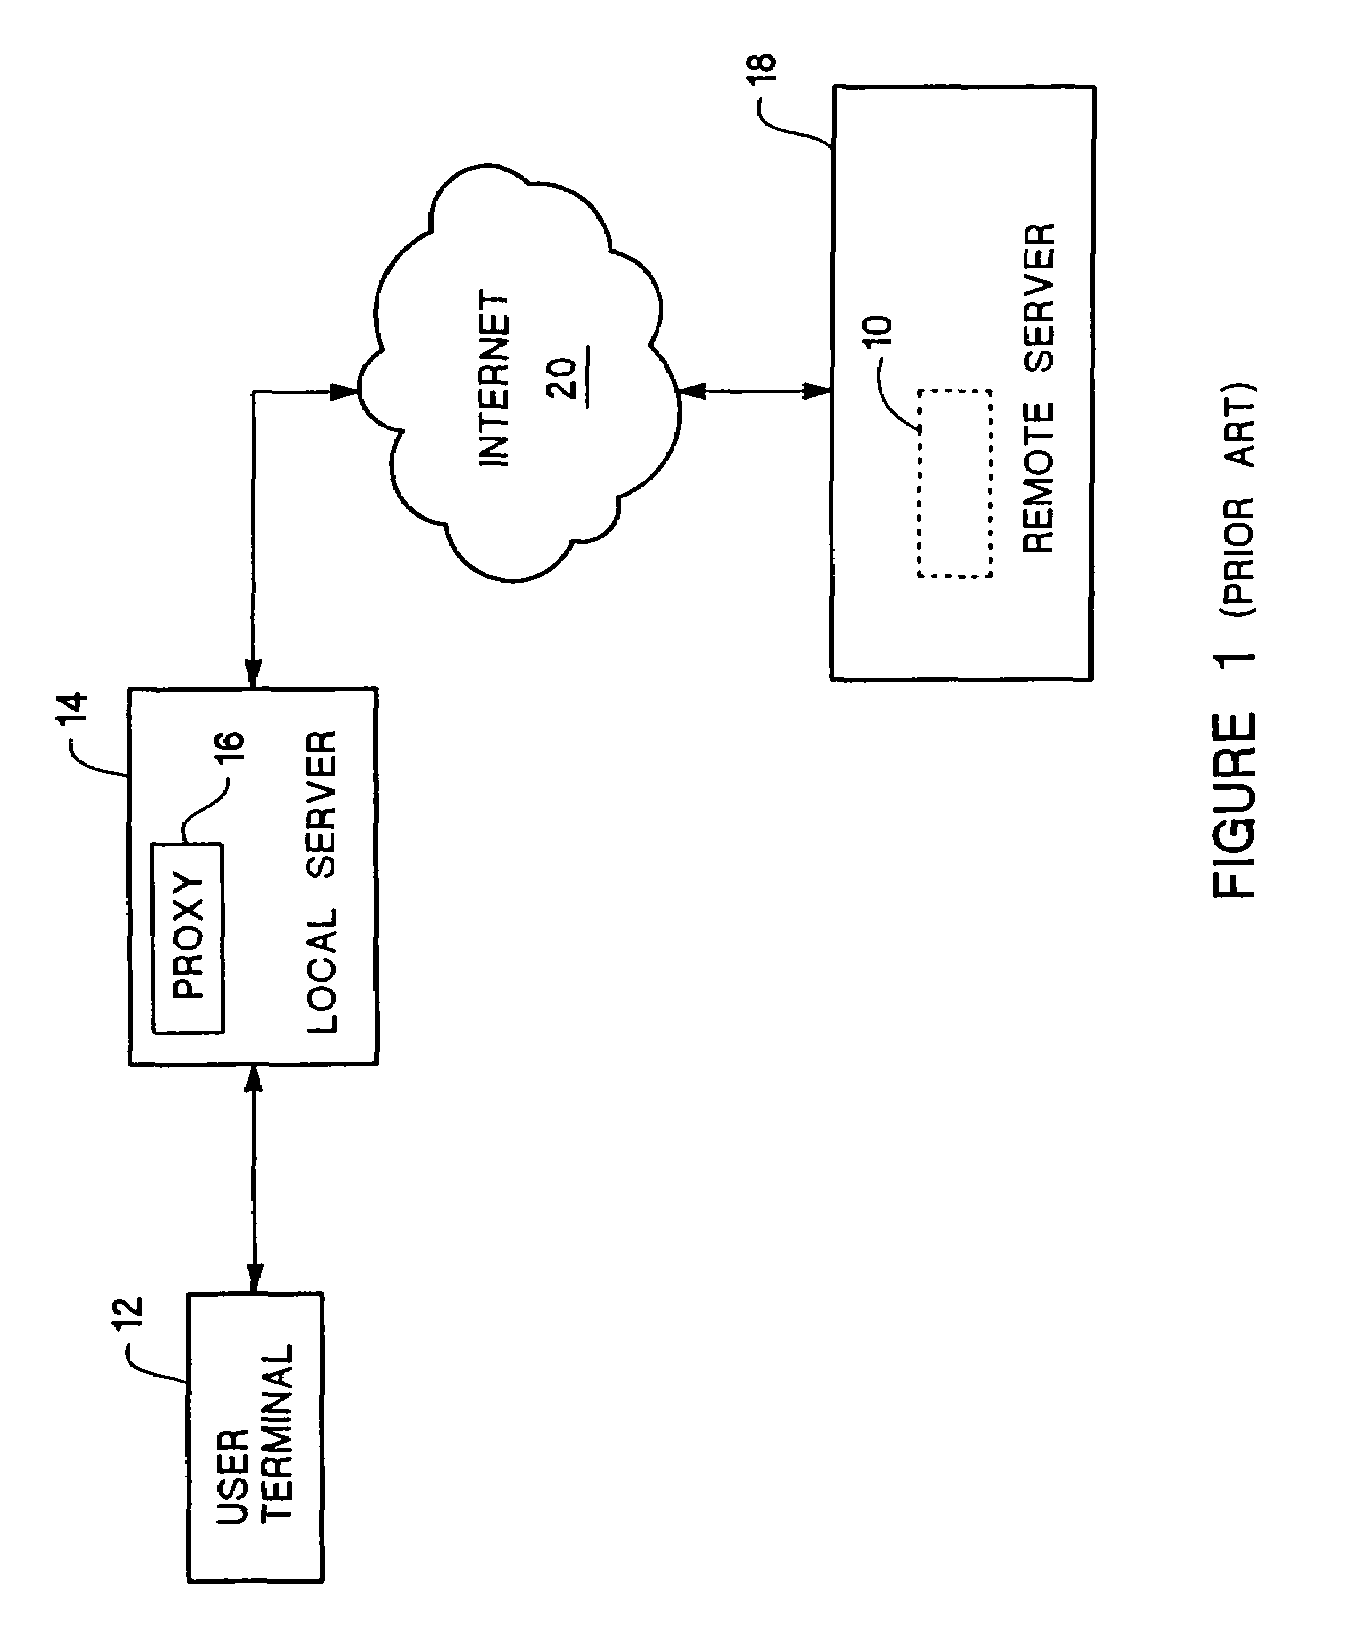 Content consistency in a data access network system